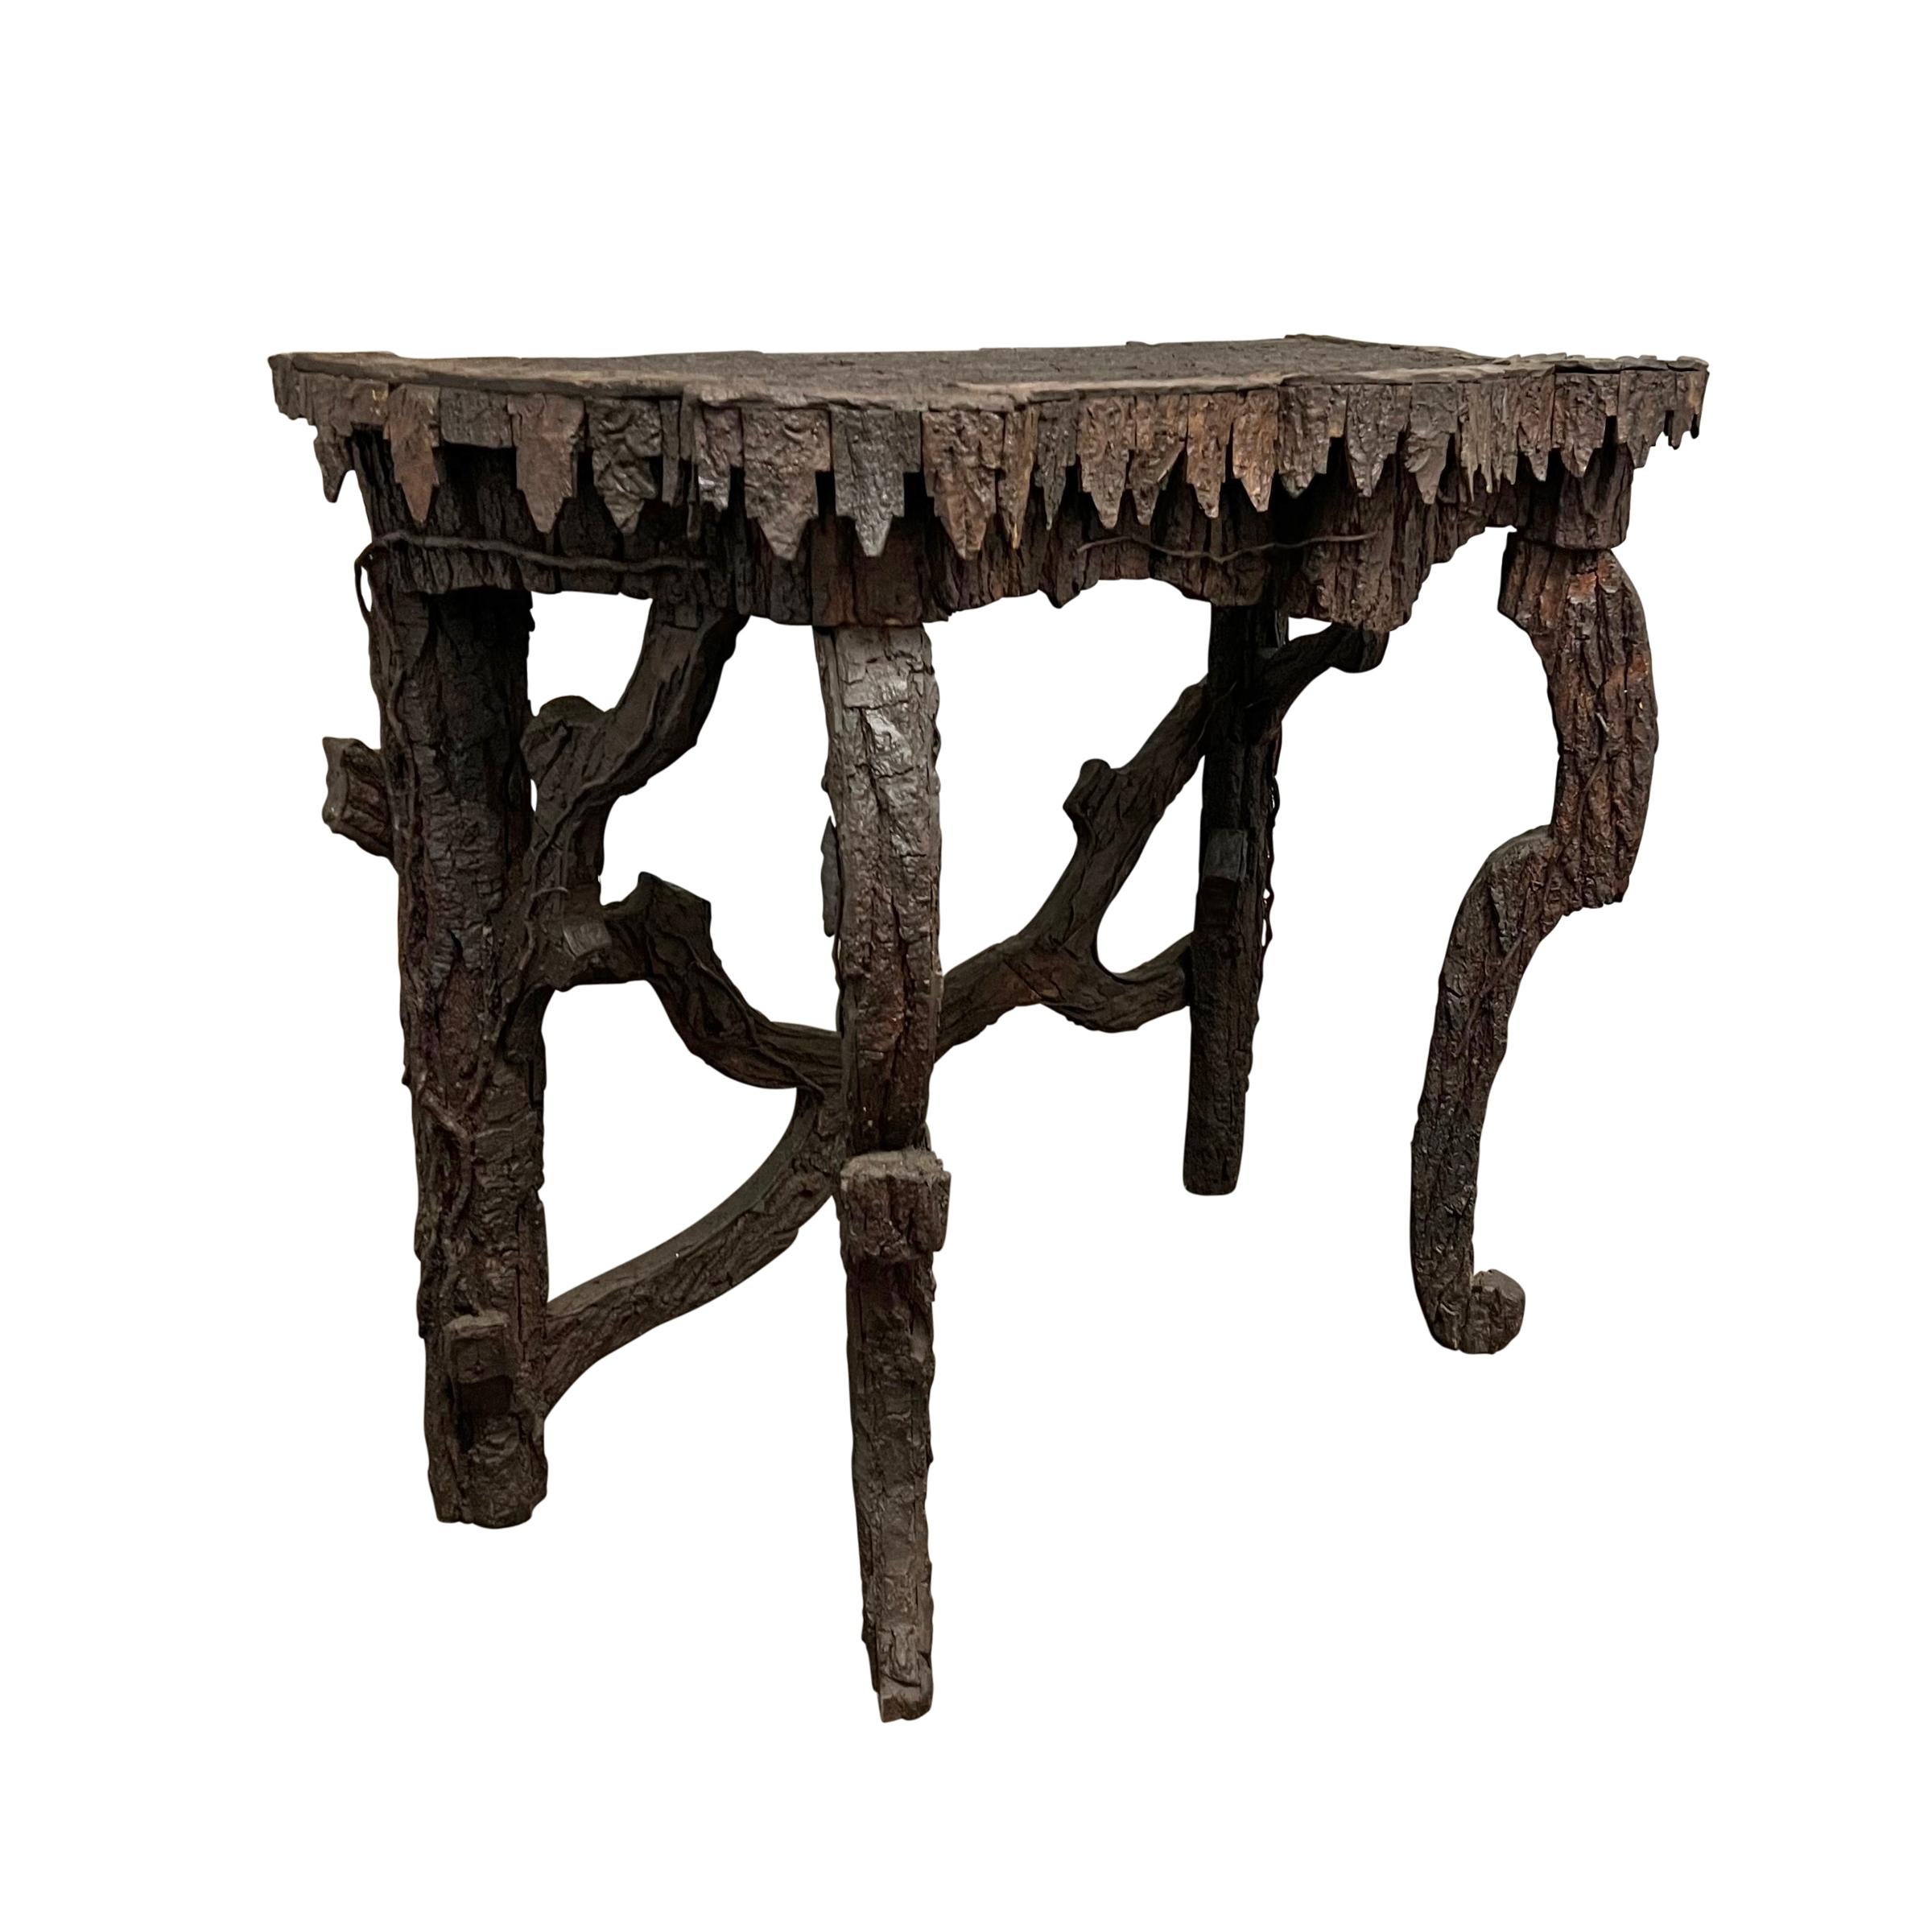 Hand-Crafted Early 20th Century Italian Bark Console Table from a Tyrolean Chalet